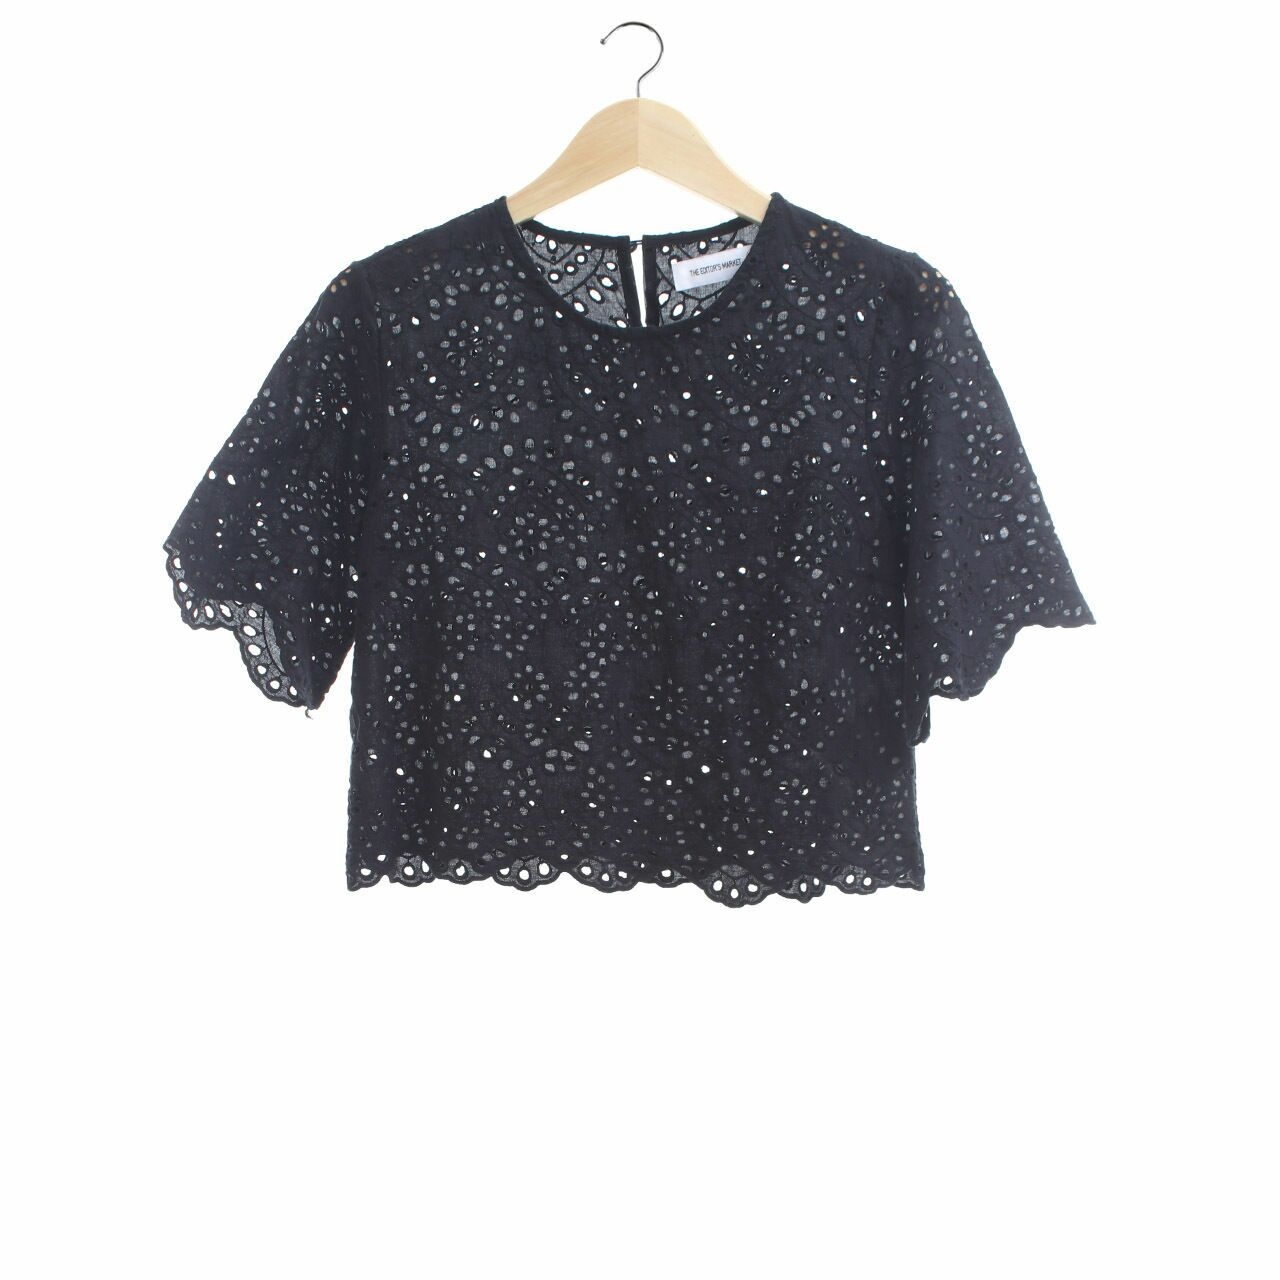 The Editor's Market Black Perforated Blouse